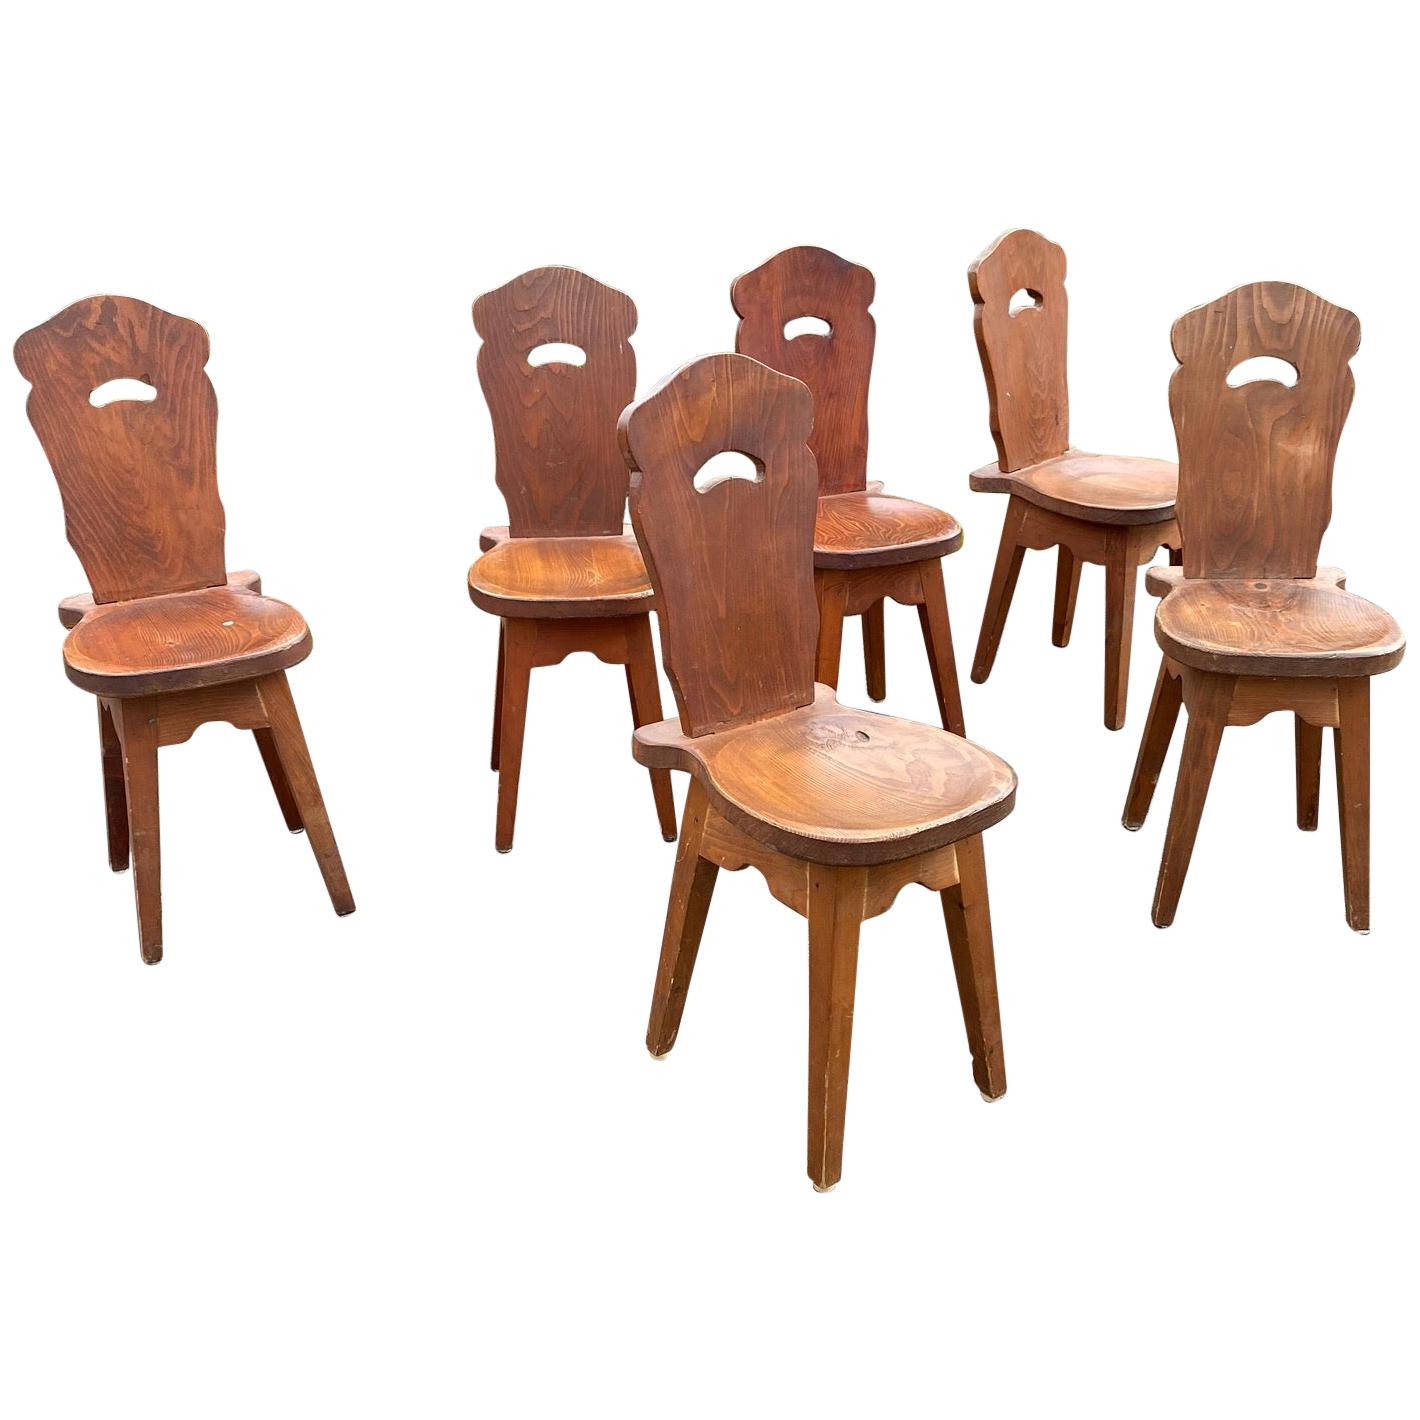 6 Brutalist Mountain Chairs, in Pine circa 1950 For Sale